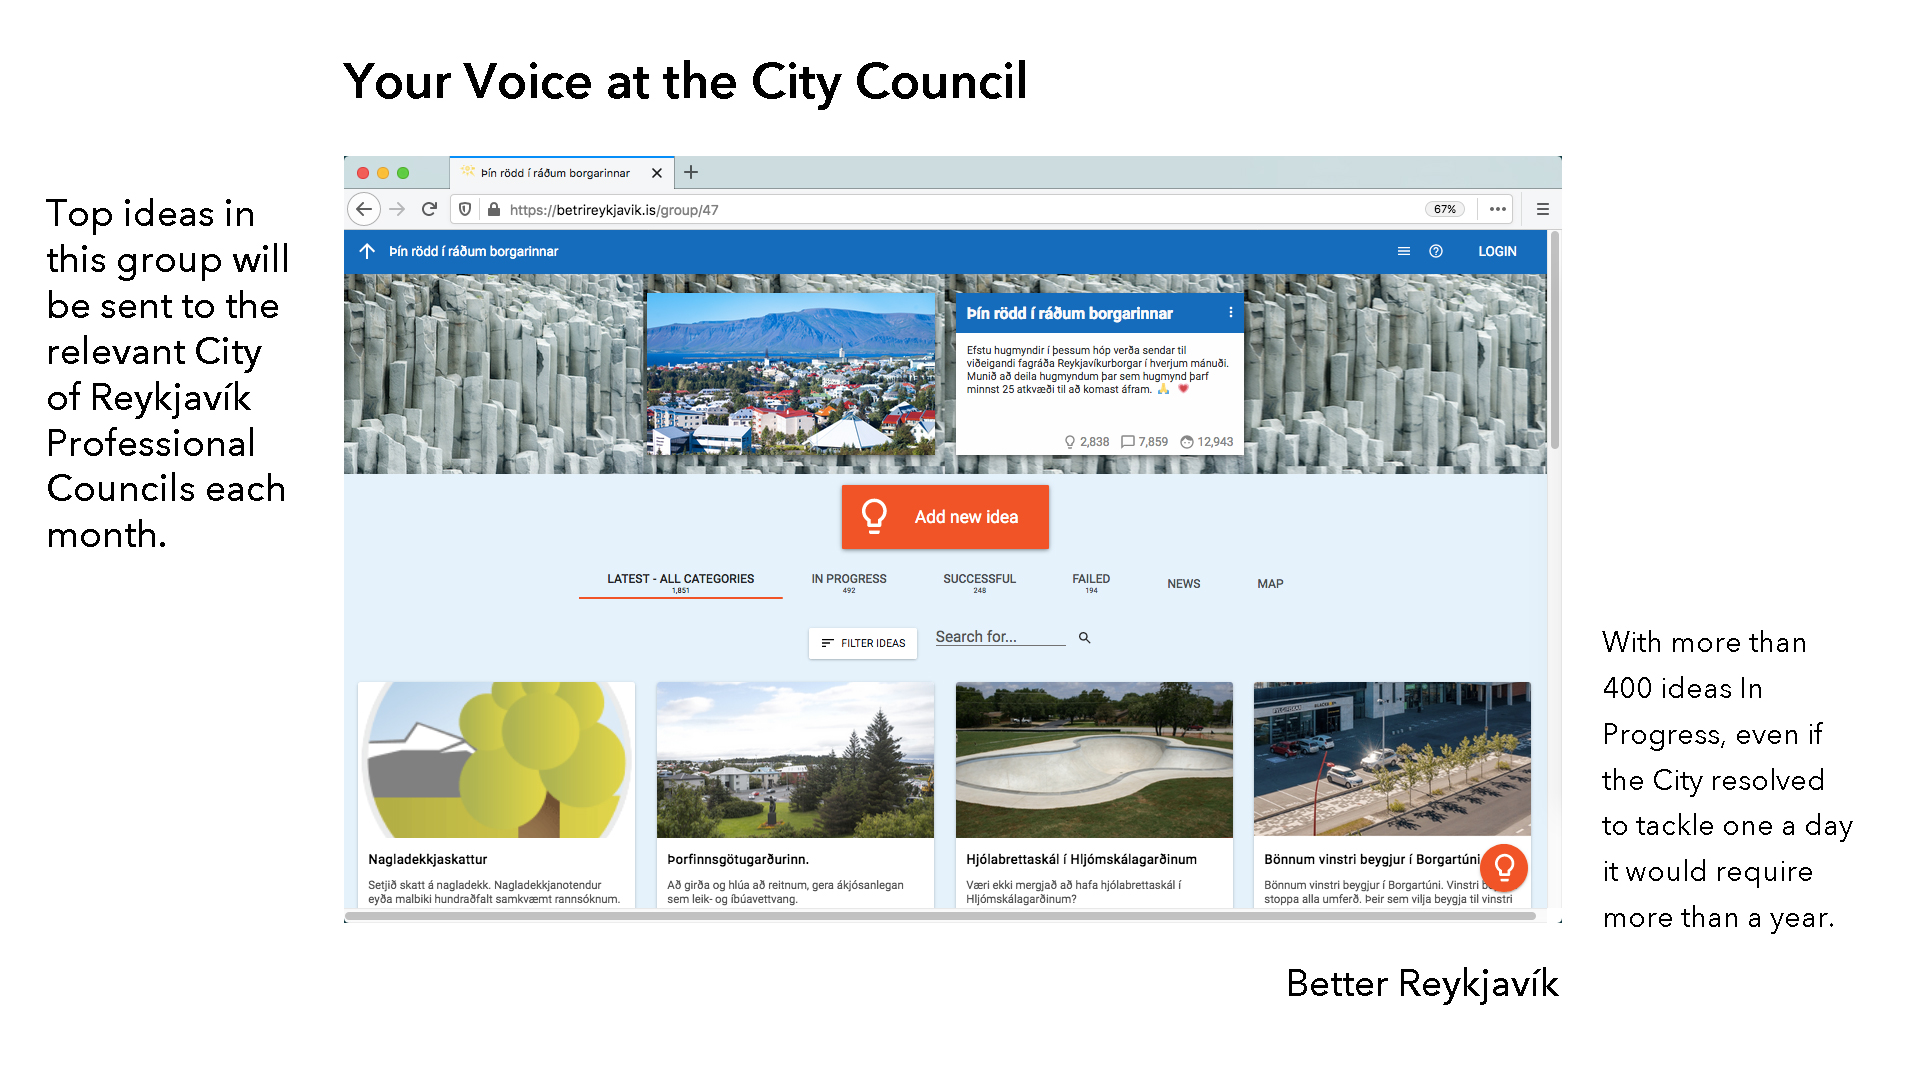 Your Voice at the City Council website